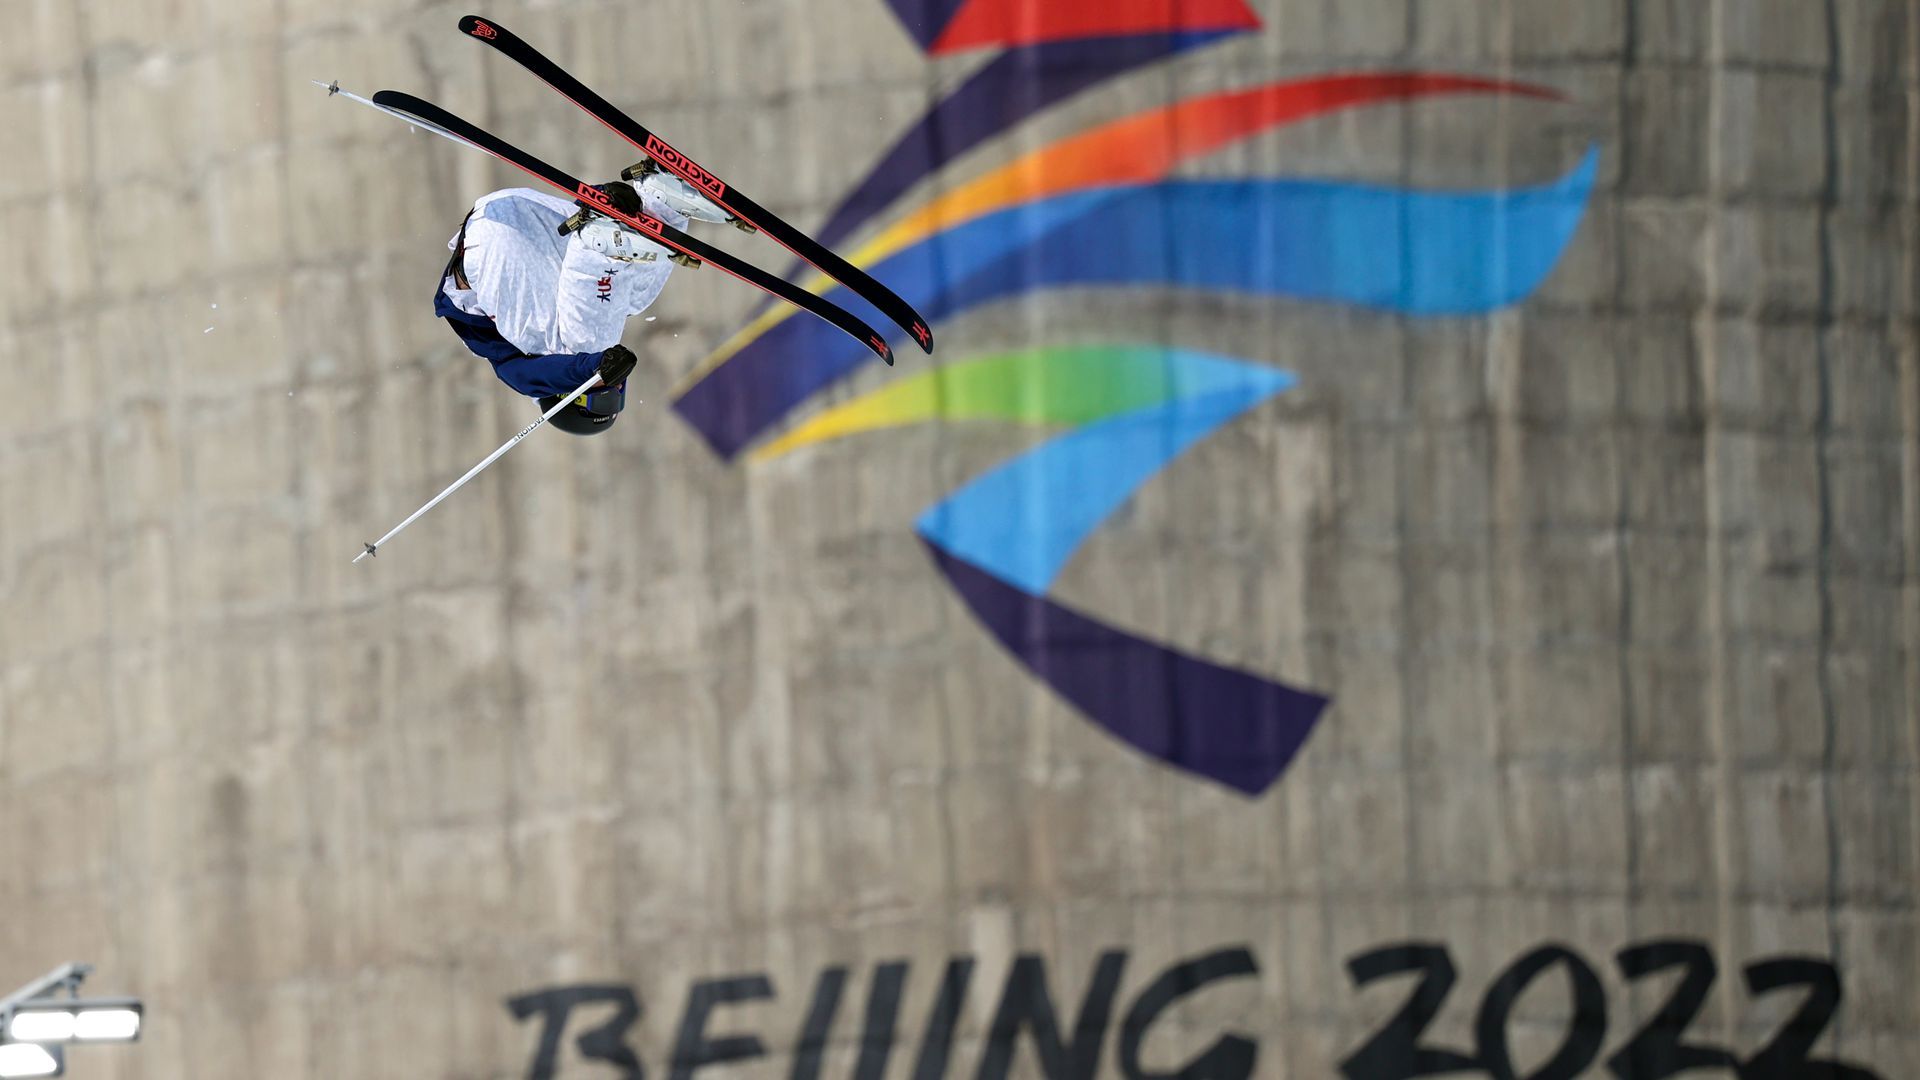 Team USA's Colby Stevenson performs a trick  during the Men's Freestyle Skiing Freeski Big Air Final on Day 5 of the 2022 Winter Olympic Games at Big Air Shougangin Beijing, China, on Feb. 9. 